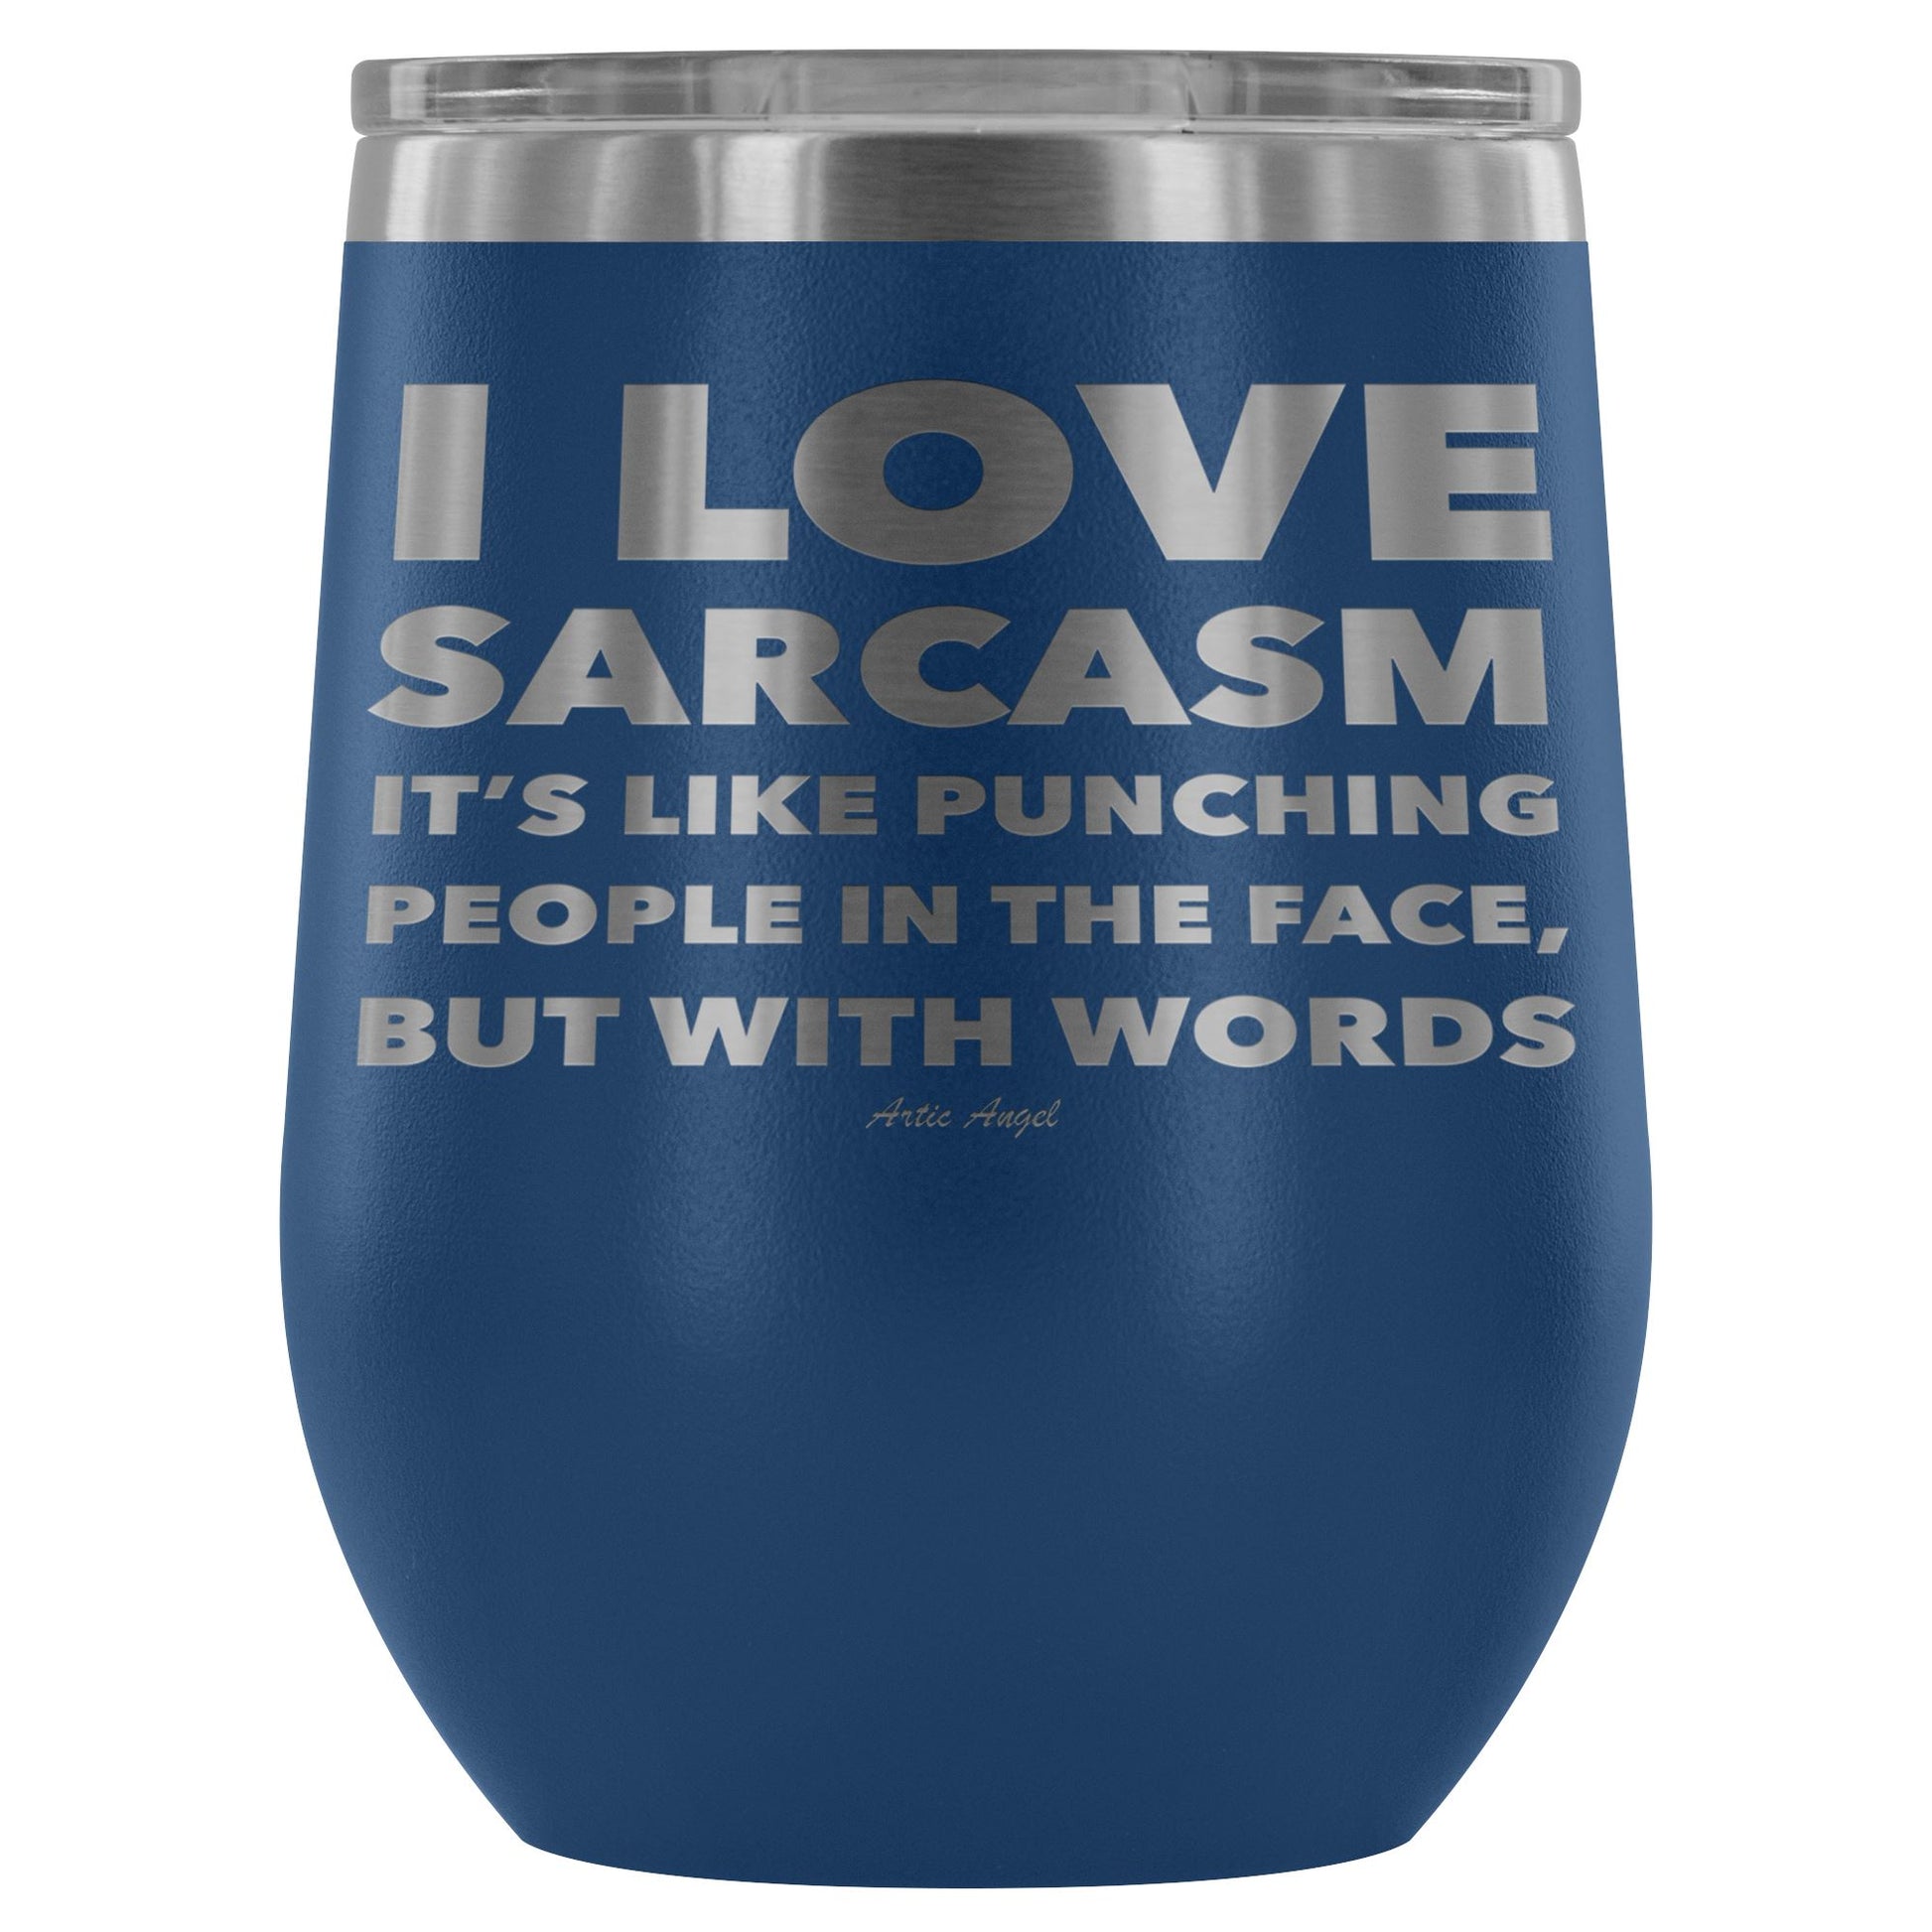 "I Love Sarcasm It's Like Punching People In The Face, But With Words" - Stemless Wine Cup Wine Tumbler Blue 